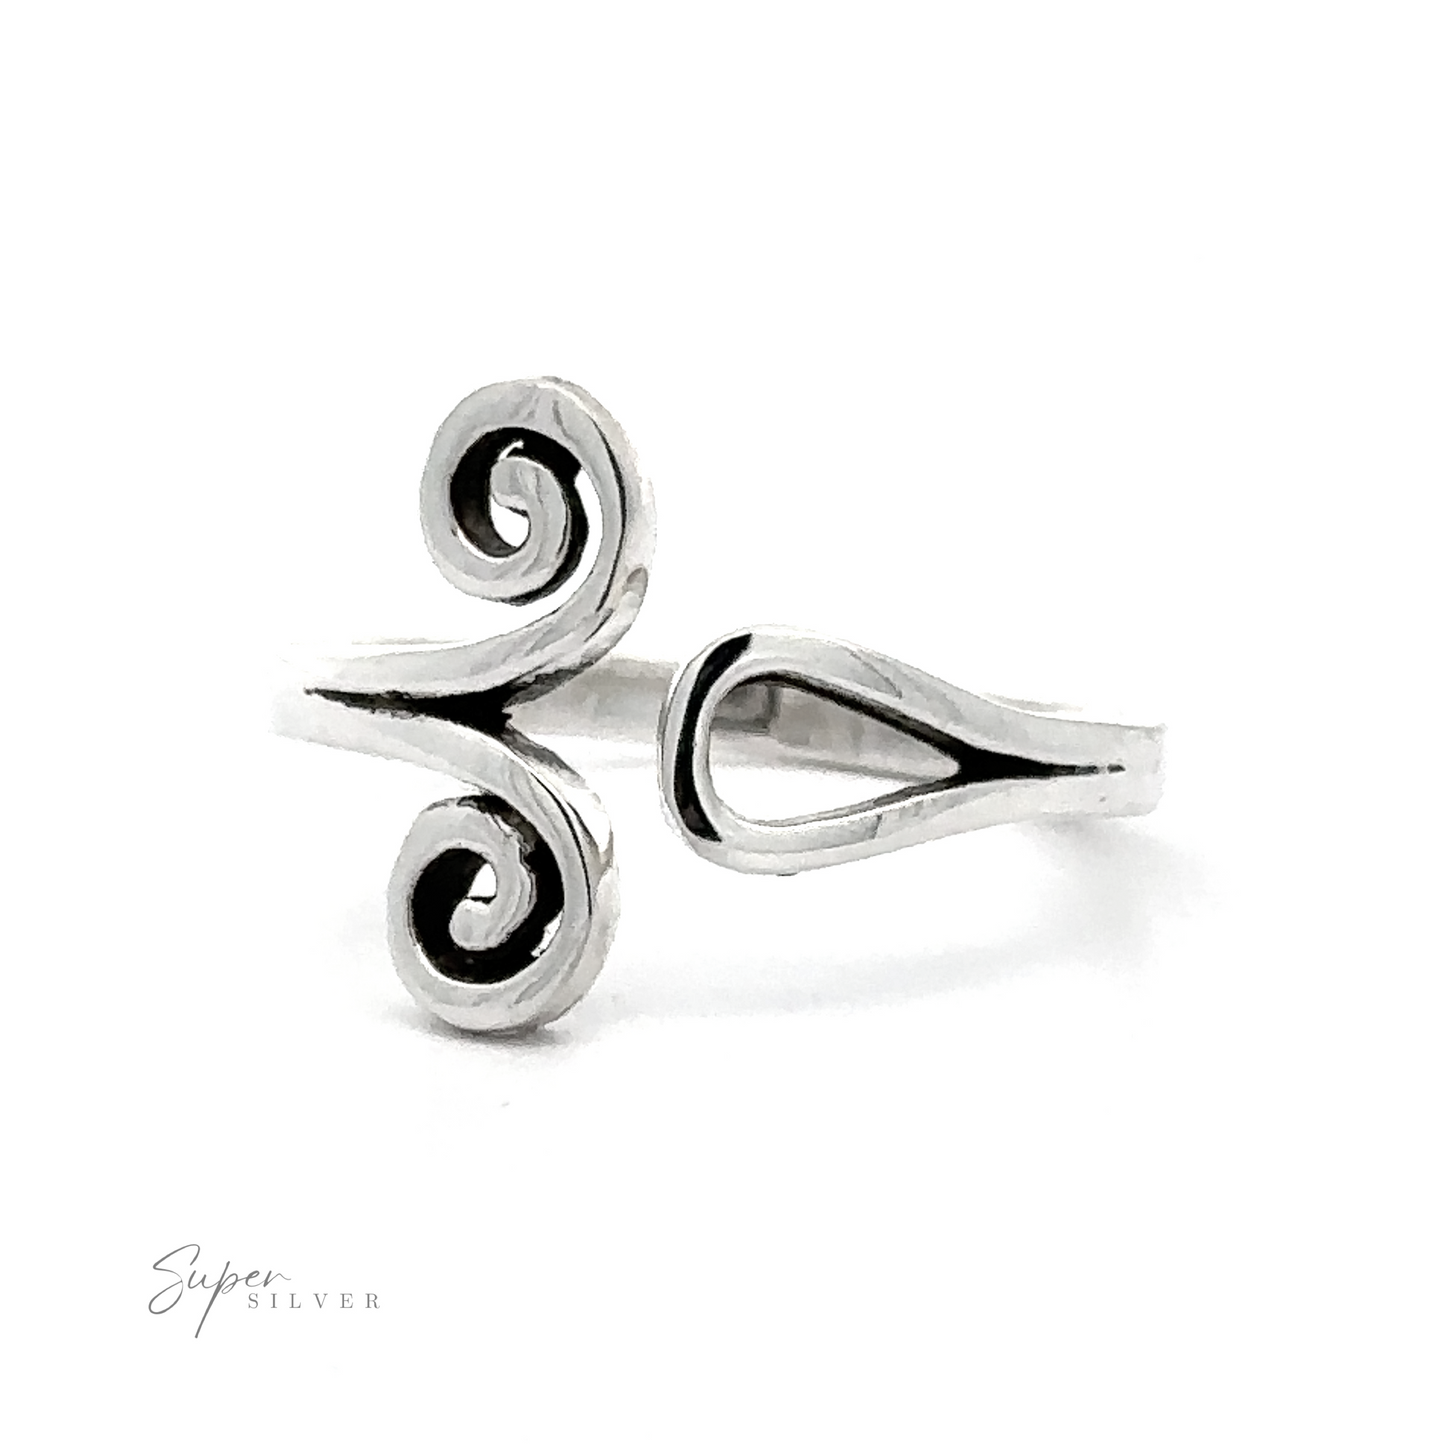 Contemporary chic meets sophistication in this Adjustable Ring With Spiral Design. With its sleek design and adjustable feature, it is the perfect accessory to elevate any outfit.